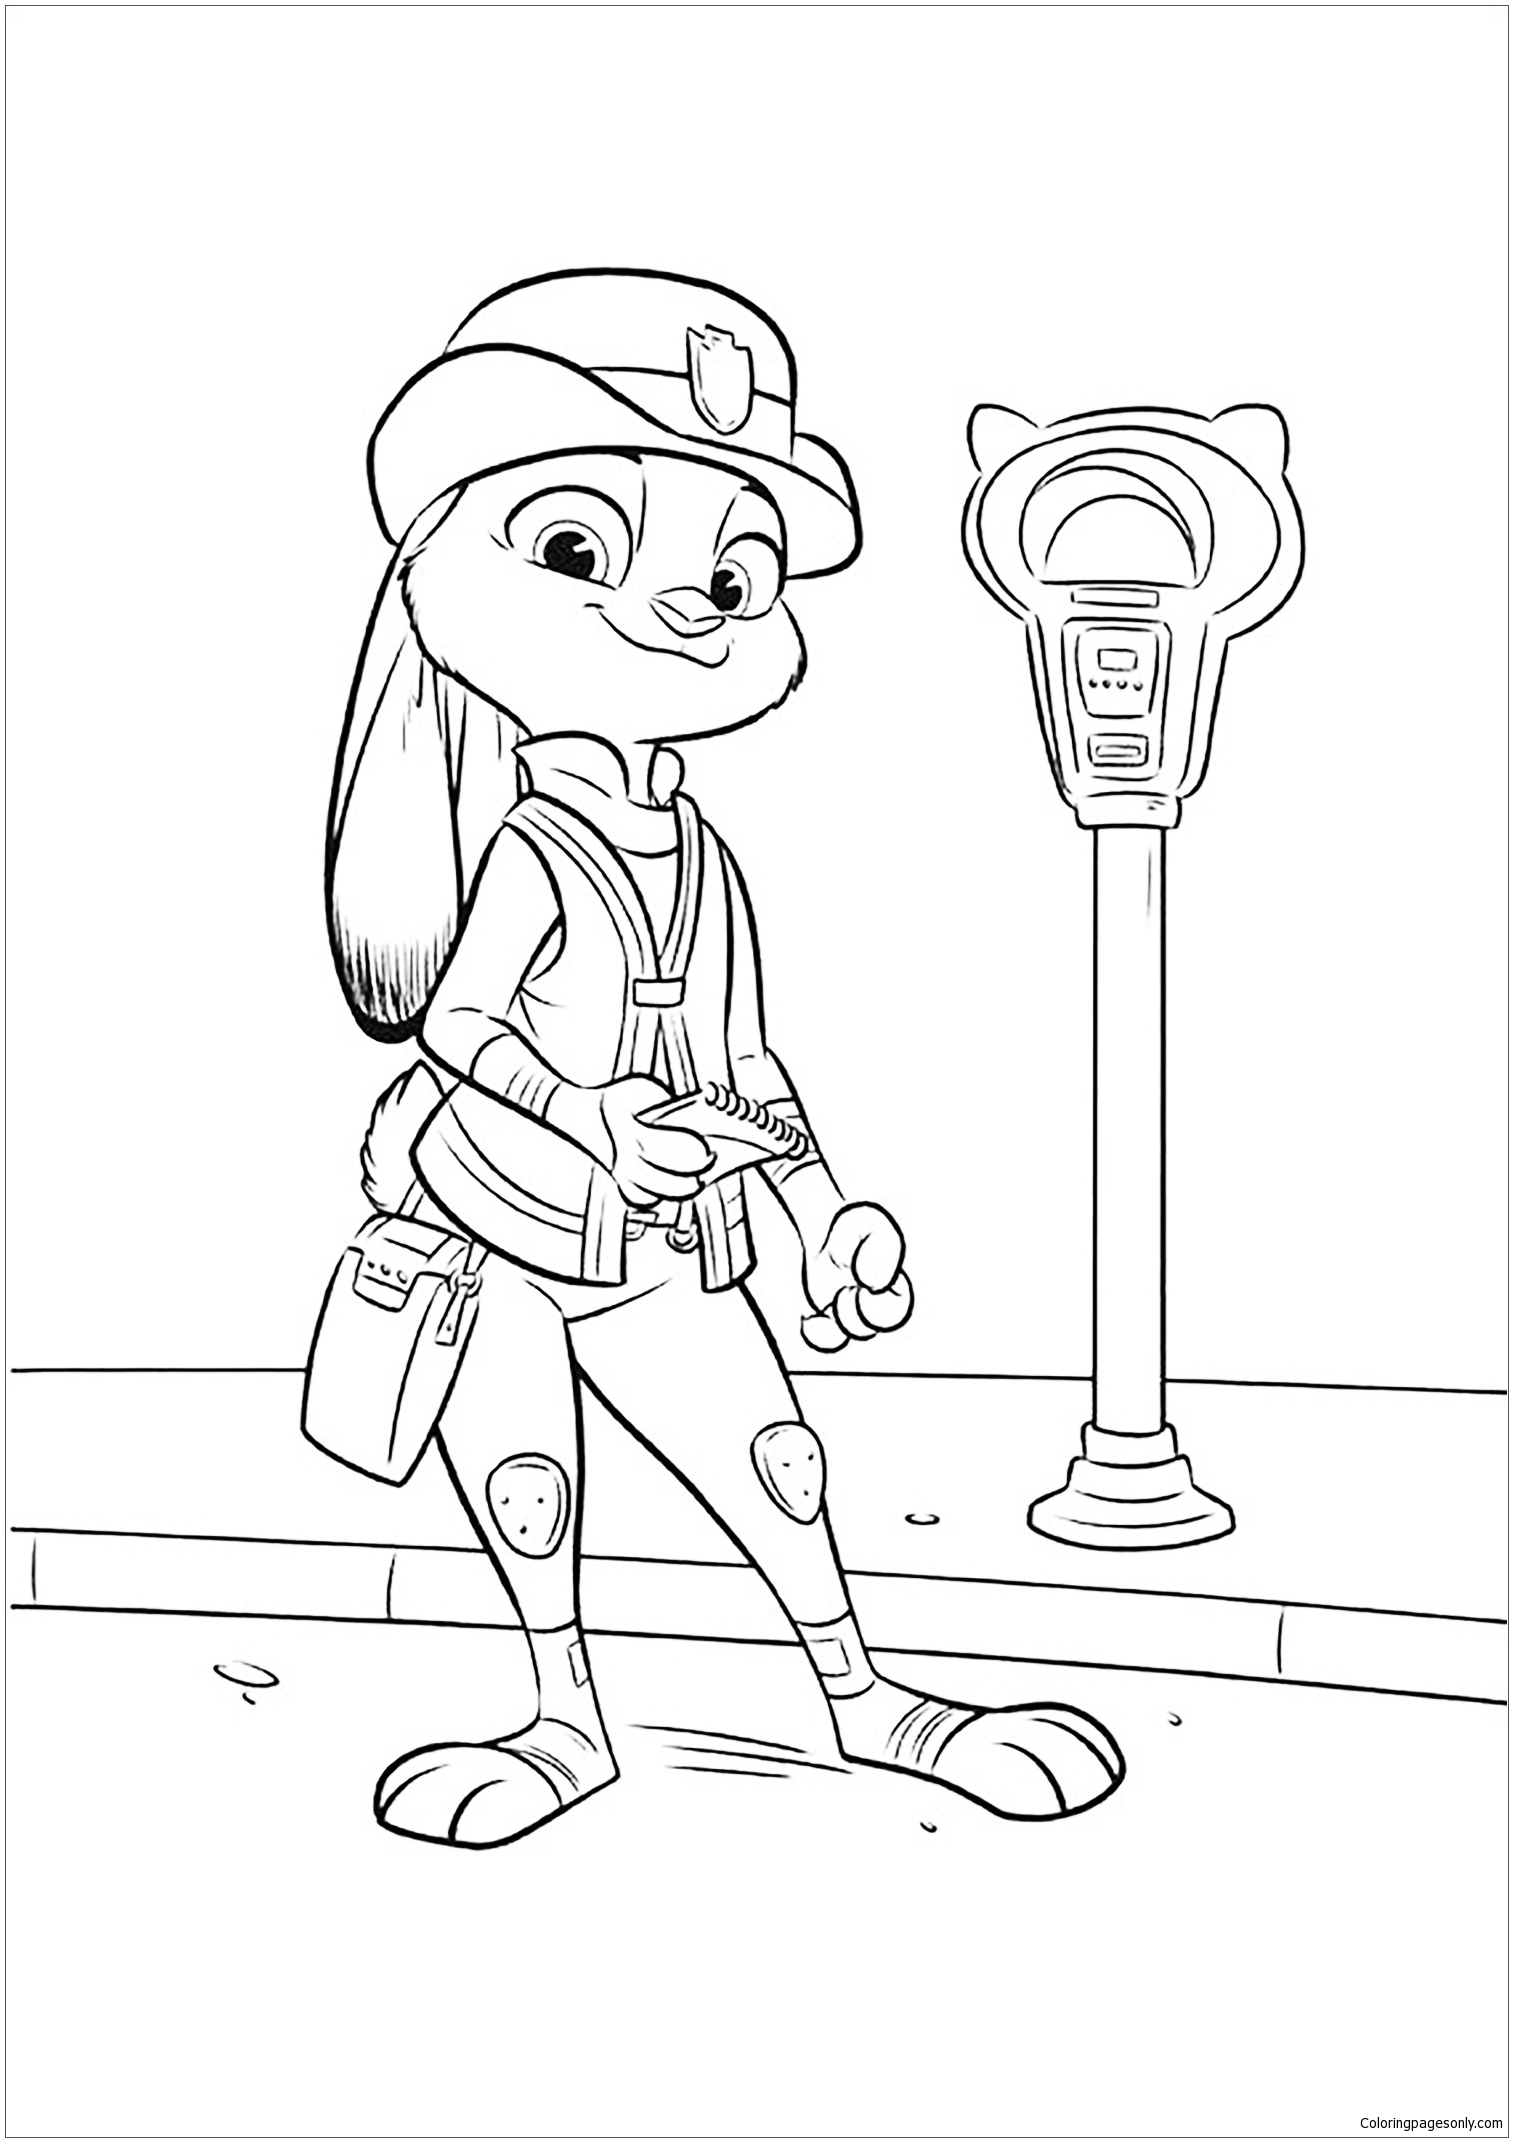 zootopia-8-coloring-page-free-printable-coloring-pages